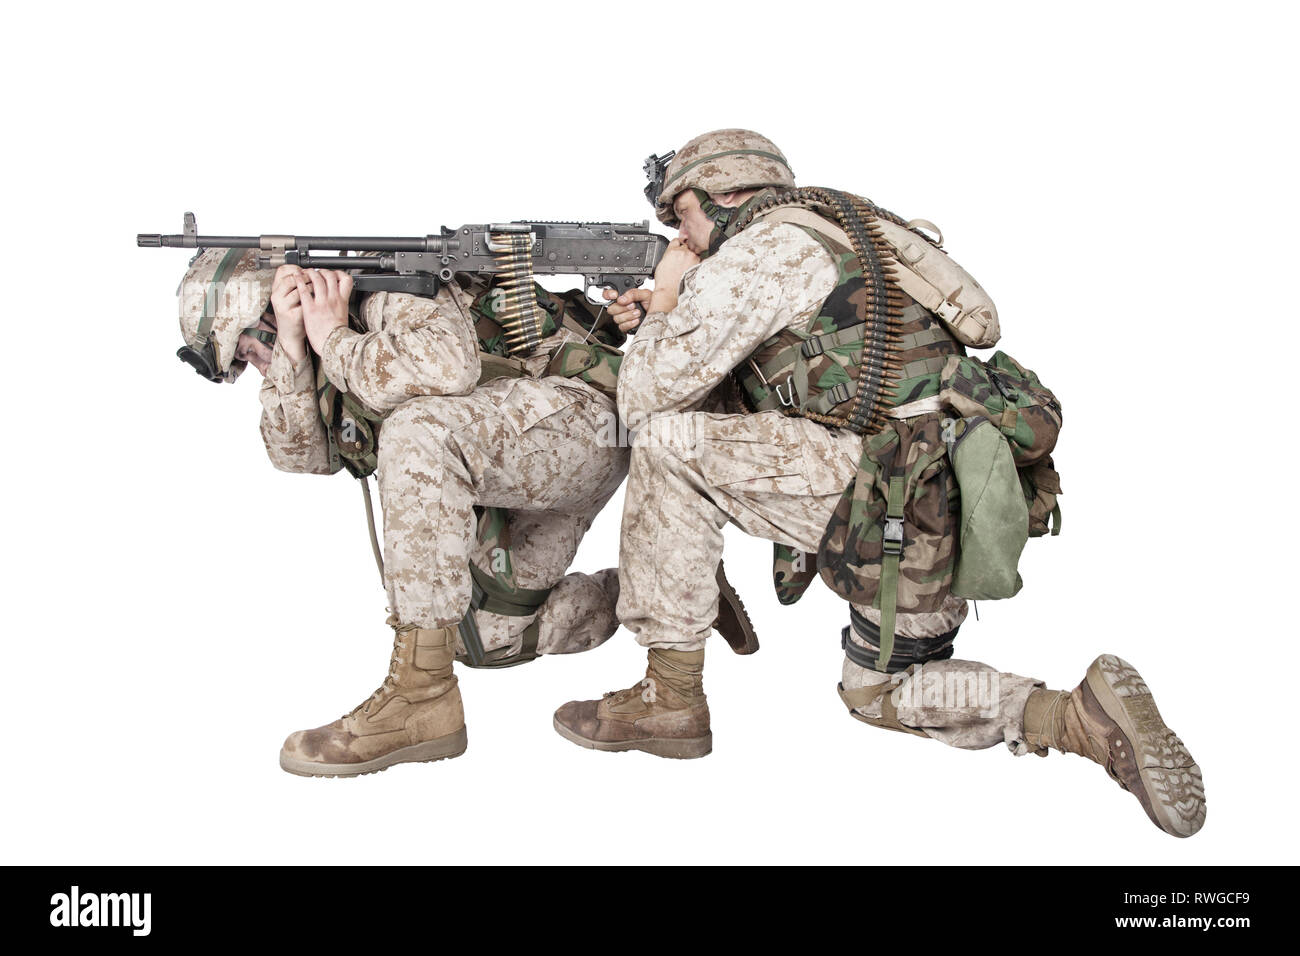 Soldier putting machine gun on back of companion and firing at enemy. Stock Photo